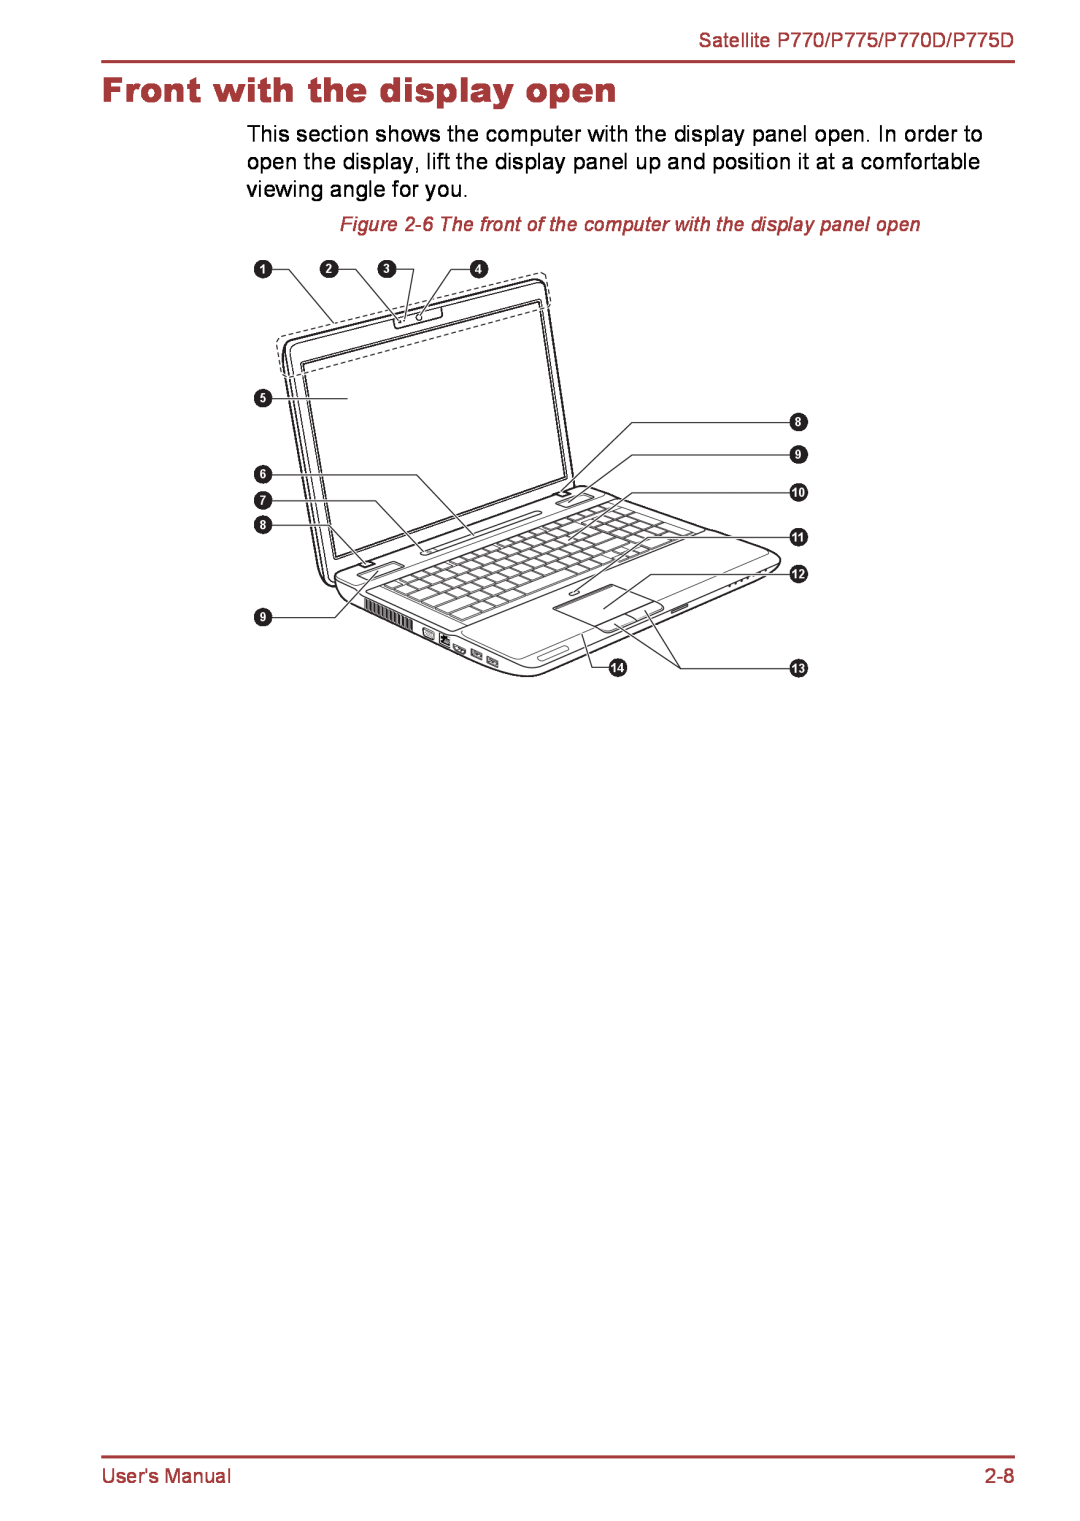 Toshiba user manual Front with the display open, Satellite P770/P775/P770D/P775D, Users Manual 